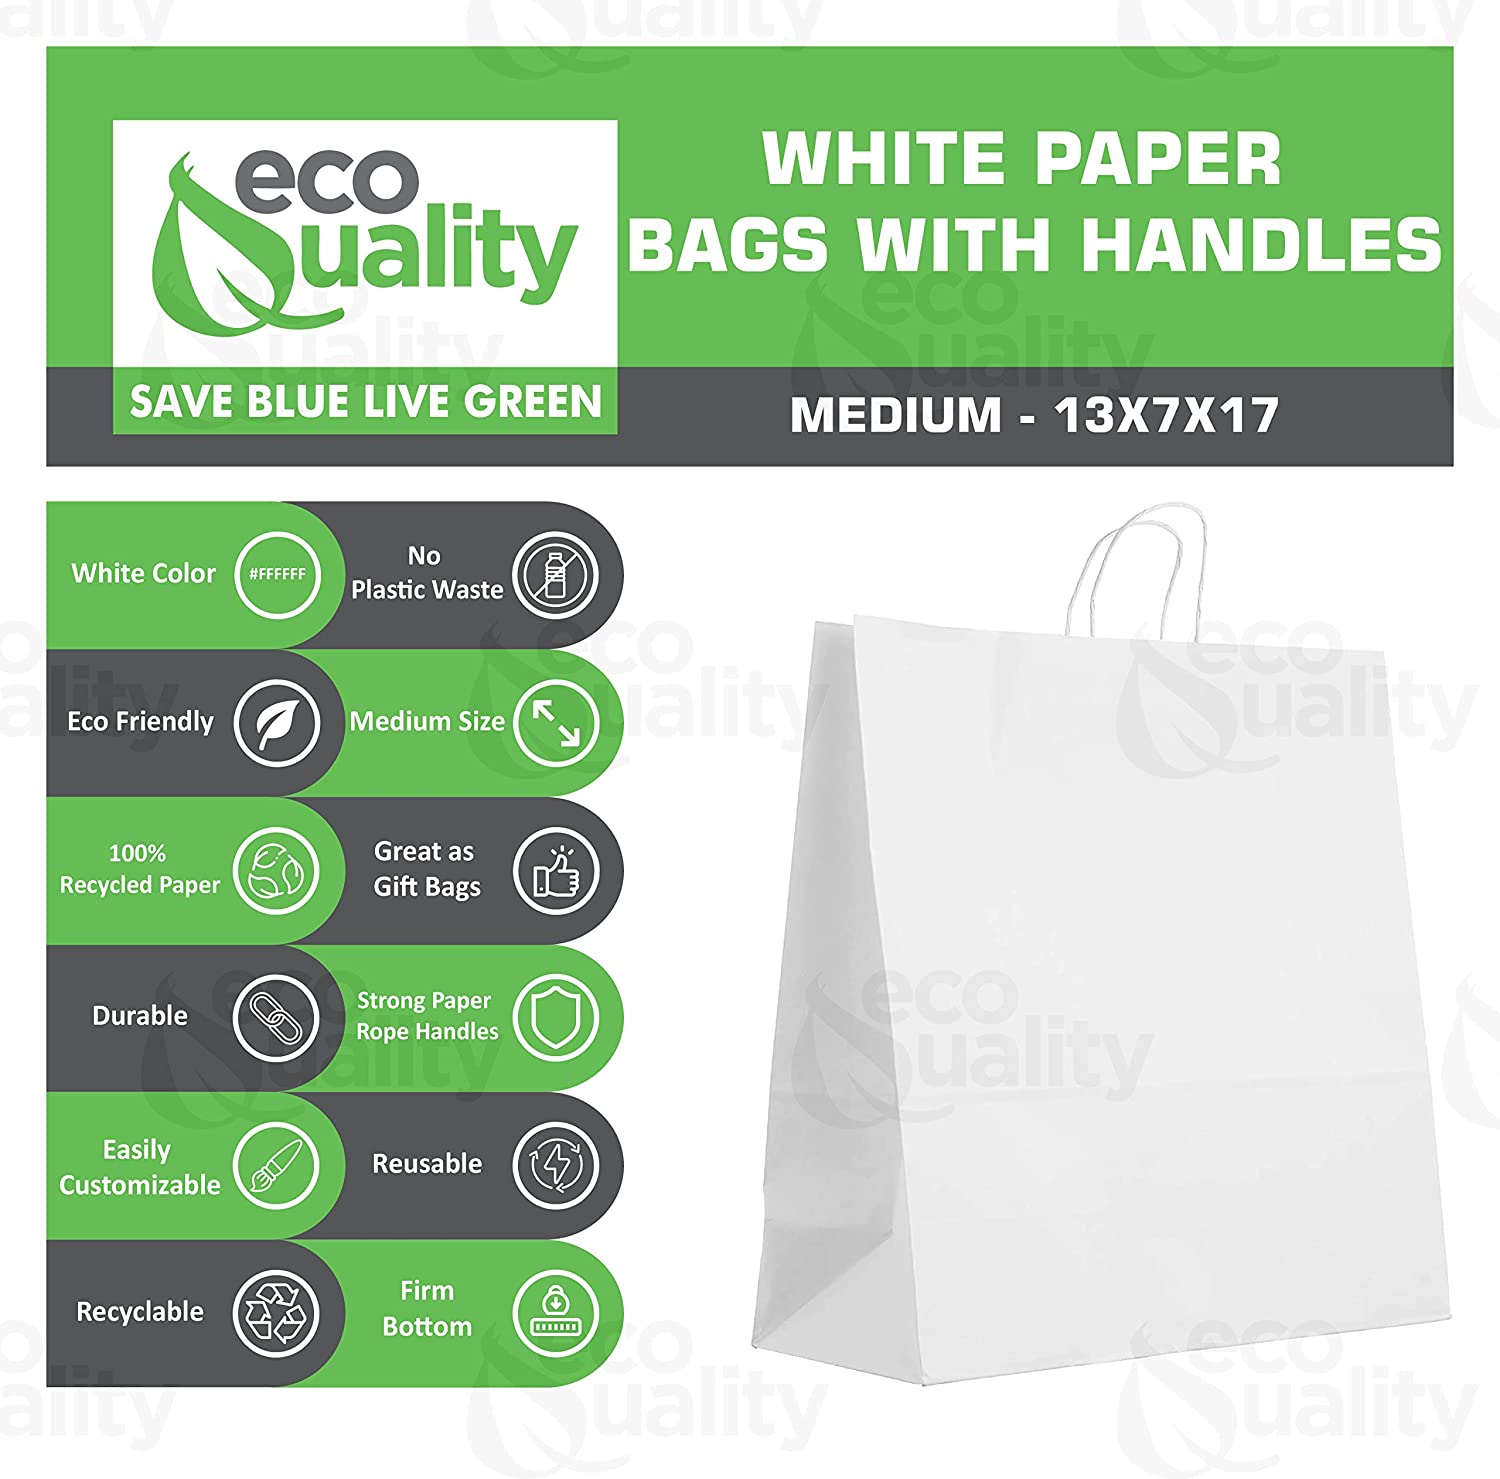 Reusable Recycled Material 20 Pounds White Gift Bag DYI Paper Bag Heavy Duty Strong Paper Bag Supermarket paper bags carry out bags Paper Bags with handles Paper Take Out Grocery Bags White Kraft Bags Ecofriendly Paper Bag Retail Merchandise bag white Paper Shopping Bags takeout bag Paper Bag Disposable medium 13x7x17 inches strong